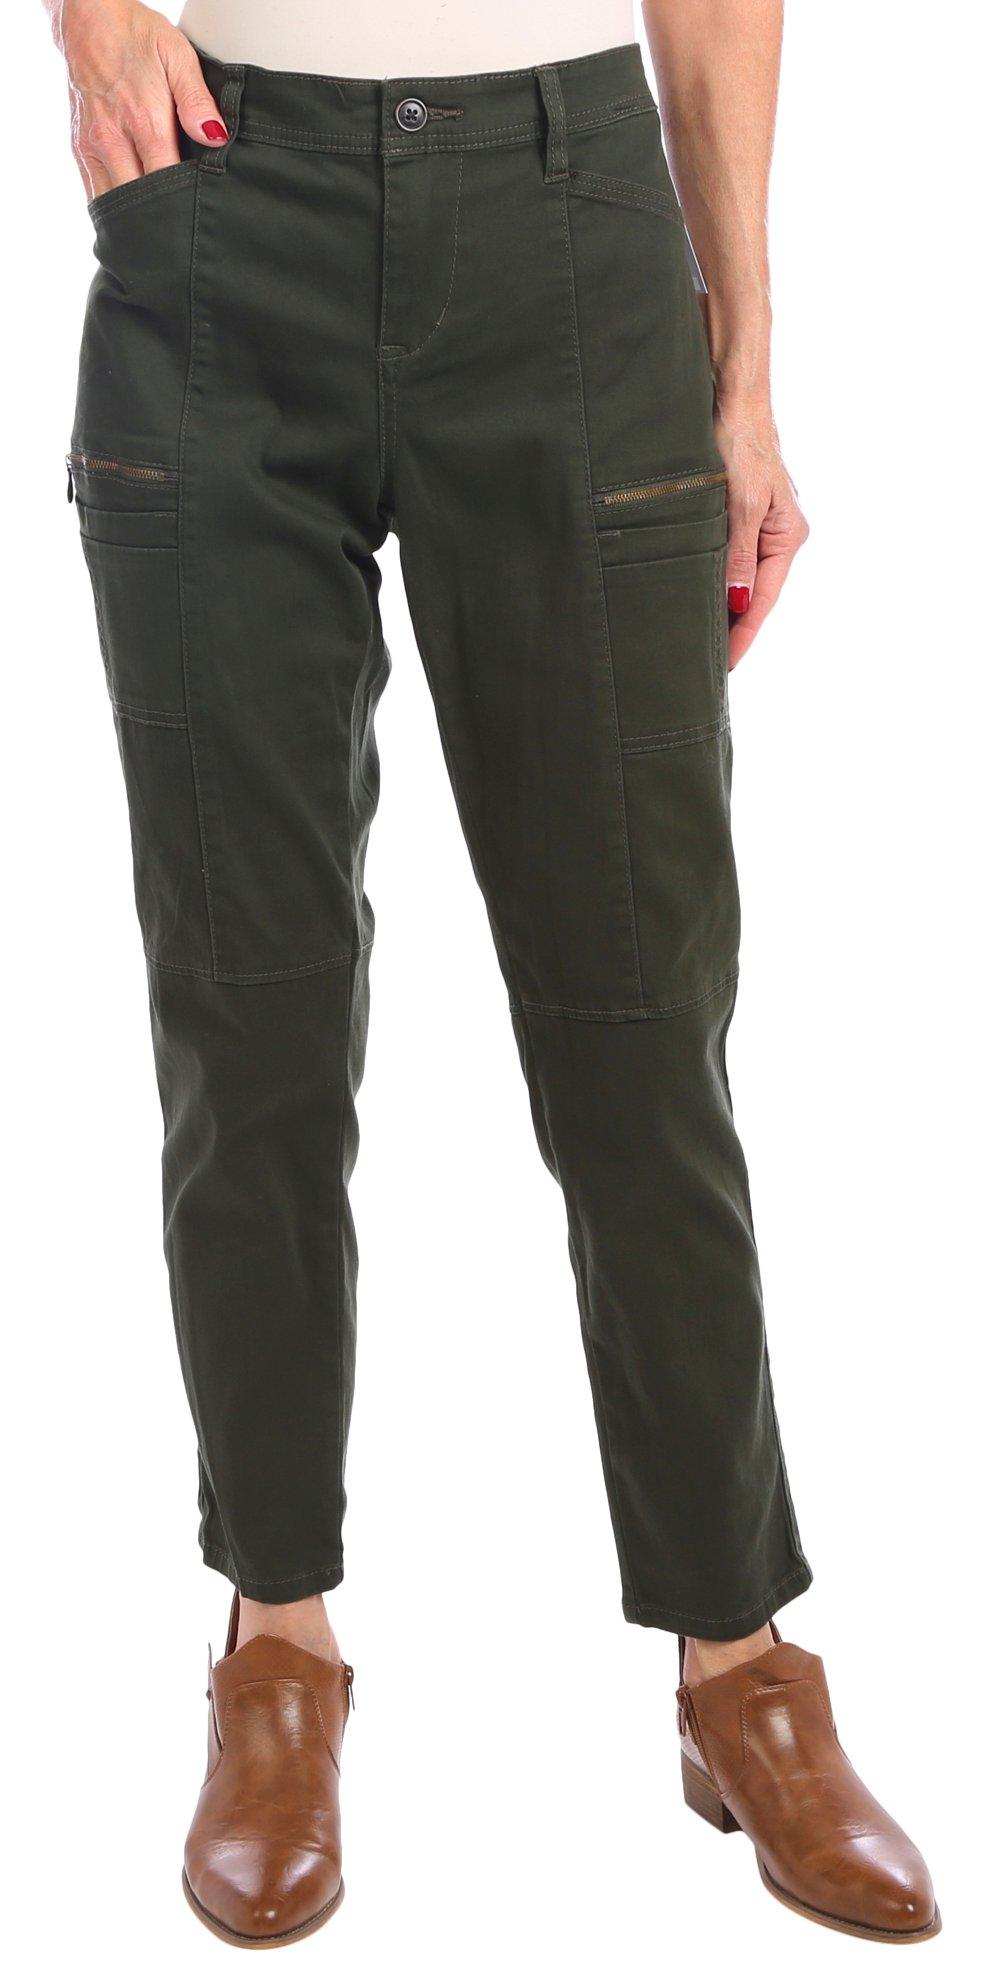 Supplies by Unionbay Womens Solid Cargo Pocket Pants